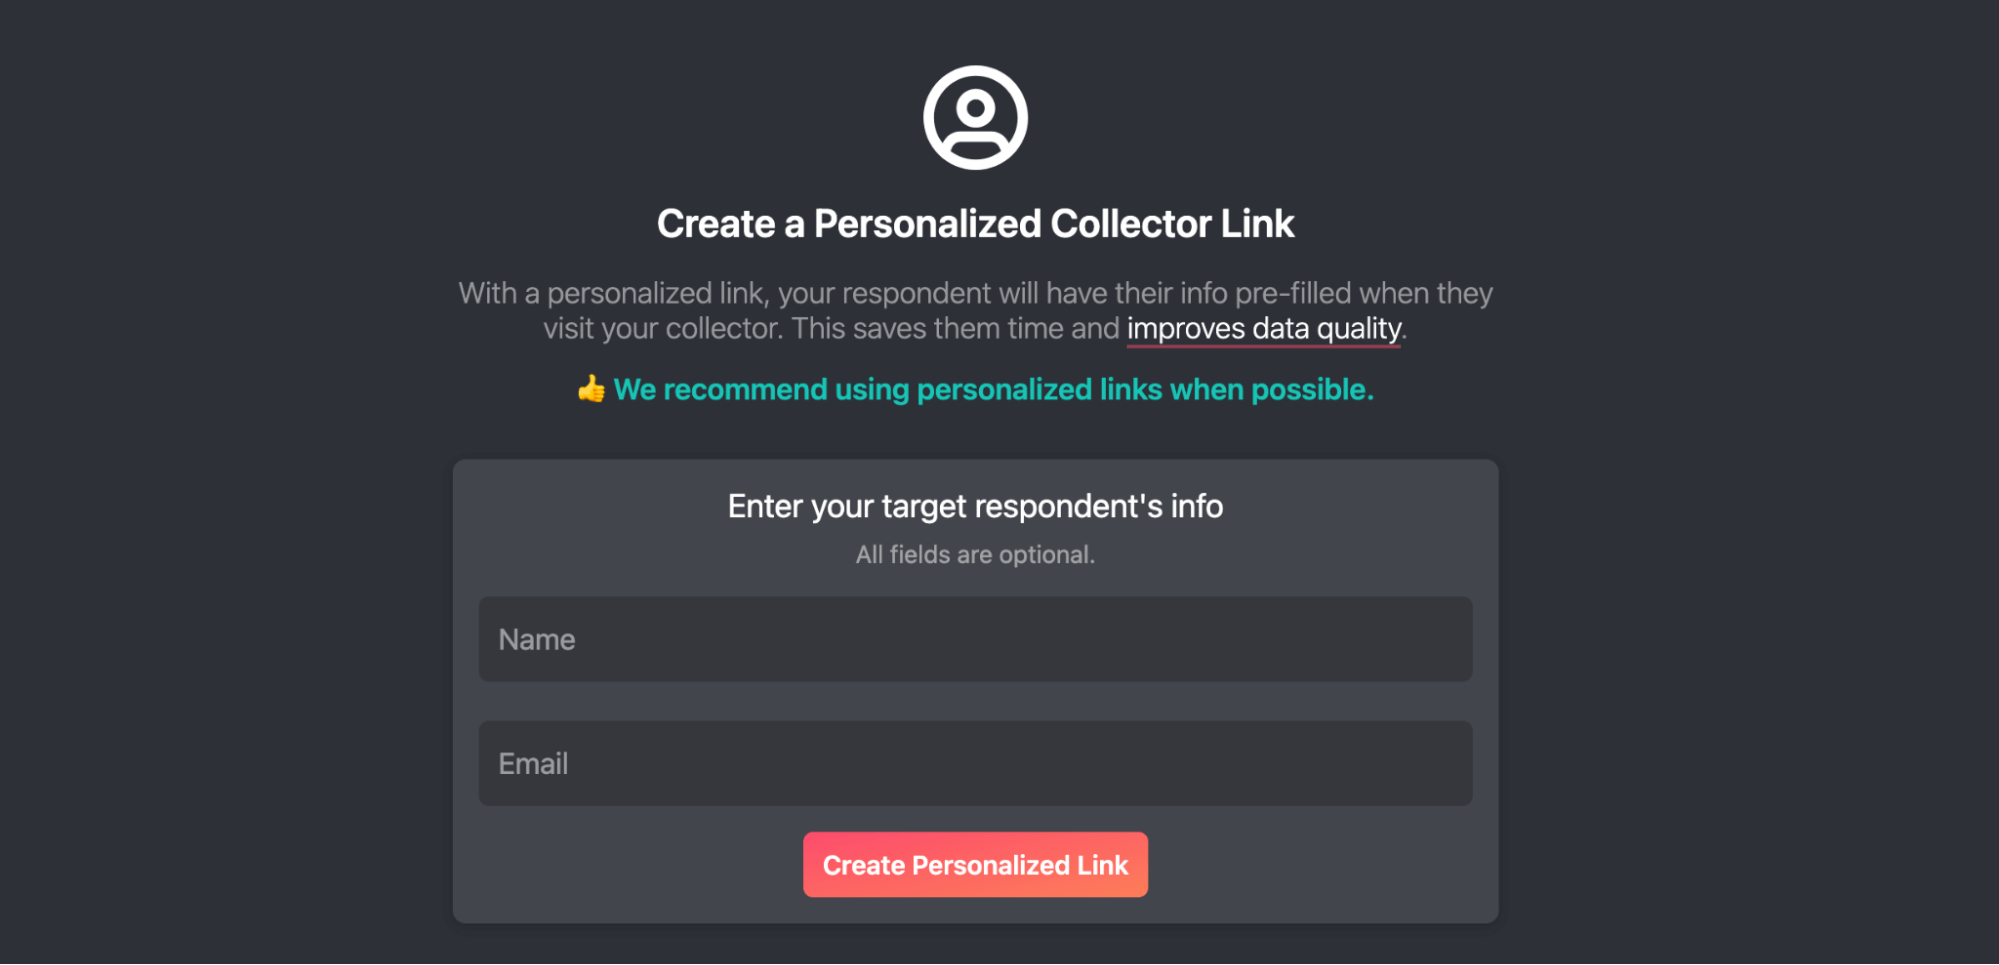 Create a Personalized Collector Link: With a personalized link, your respondent will have their info pre-filled when they visit your video collector. This saves them time and improves data quality.